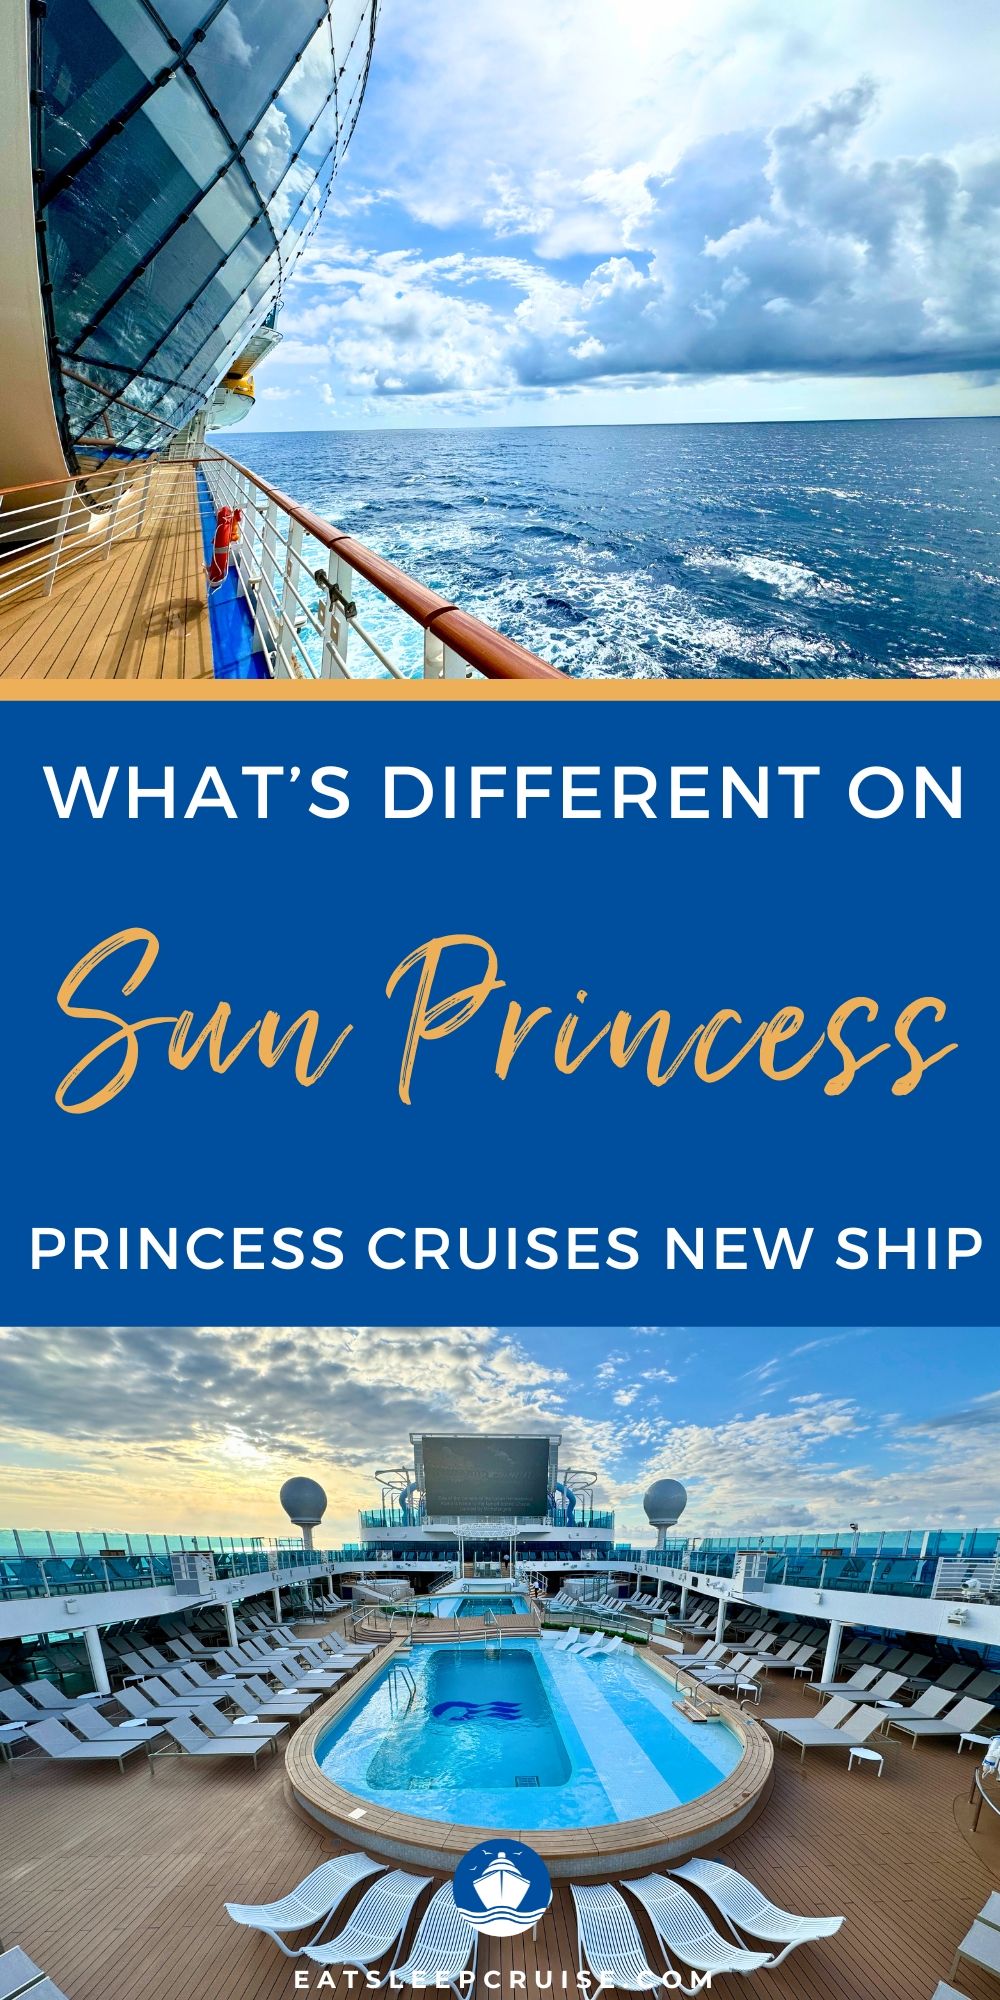 What Makes Sun Princess Different from the Rest of the Fleet